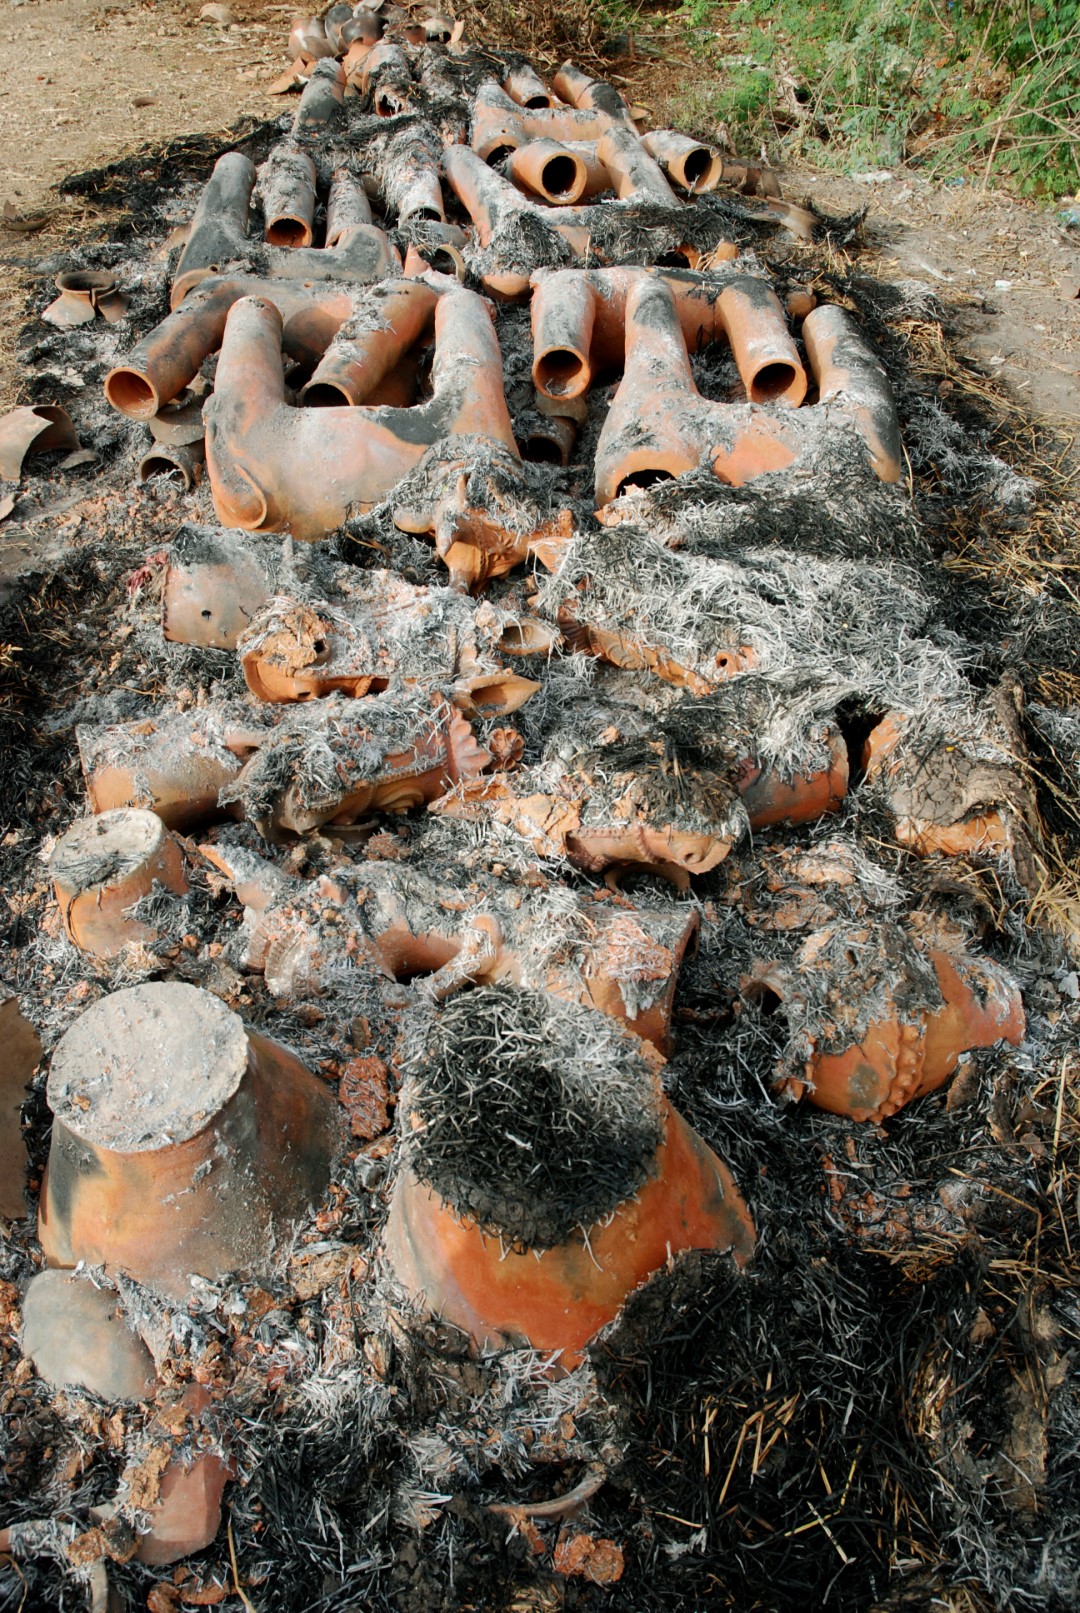 <span style="font-weight:normal;">Due to the intense summer heat, the pieces are baked in the early morning, just after sunrise. The combustible material is totally consumed and the pieces are entirely baked in about one hour, and the pottery is left to cool down until the next day. The morning after, the wood, coconut shells and straw have turned into a fine ash blanketing what has now become terracotta.</span>